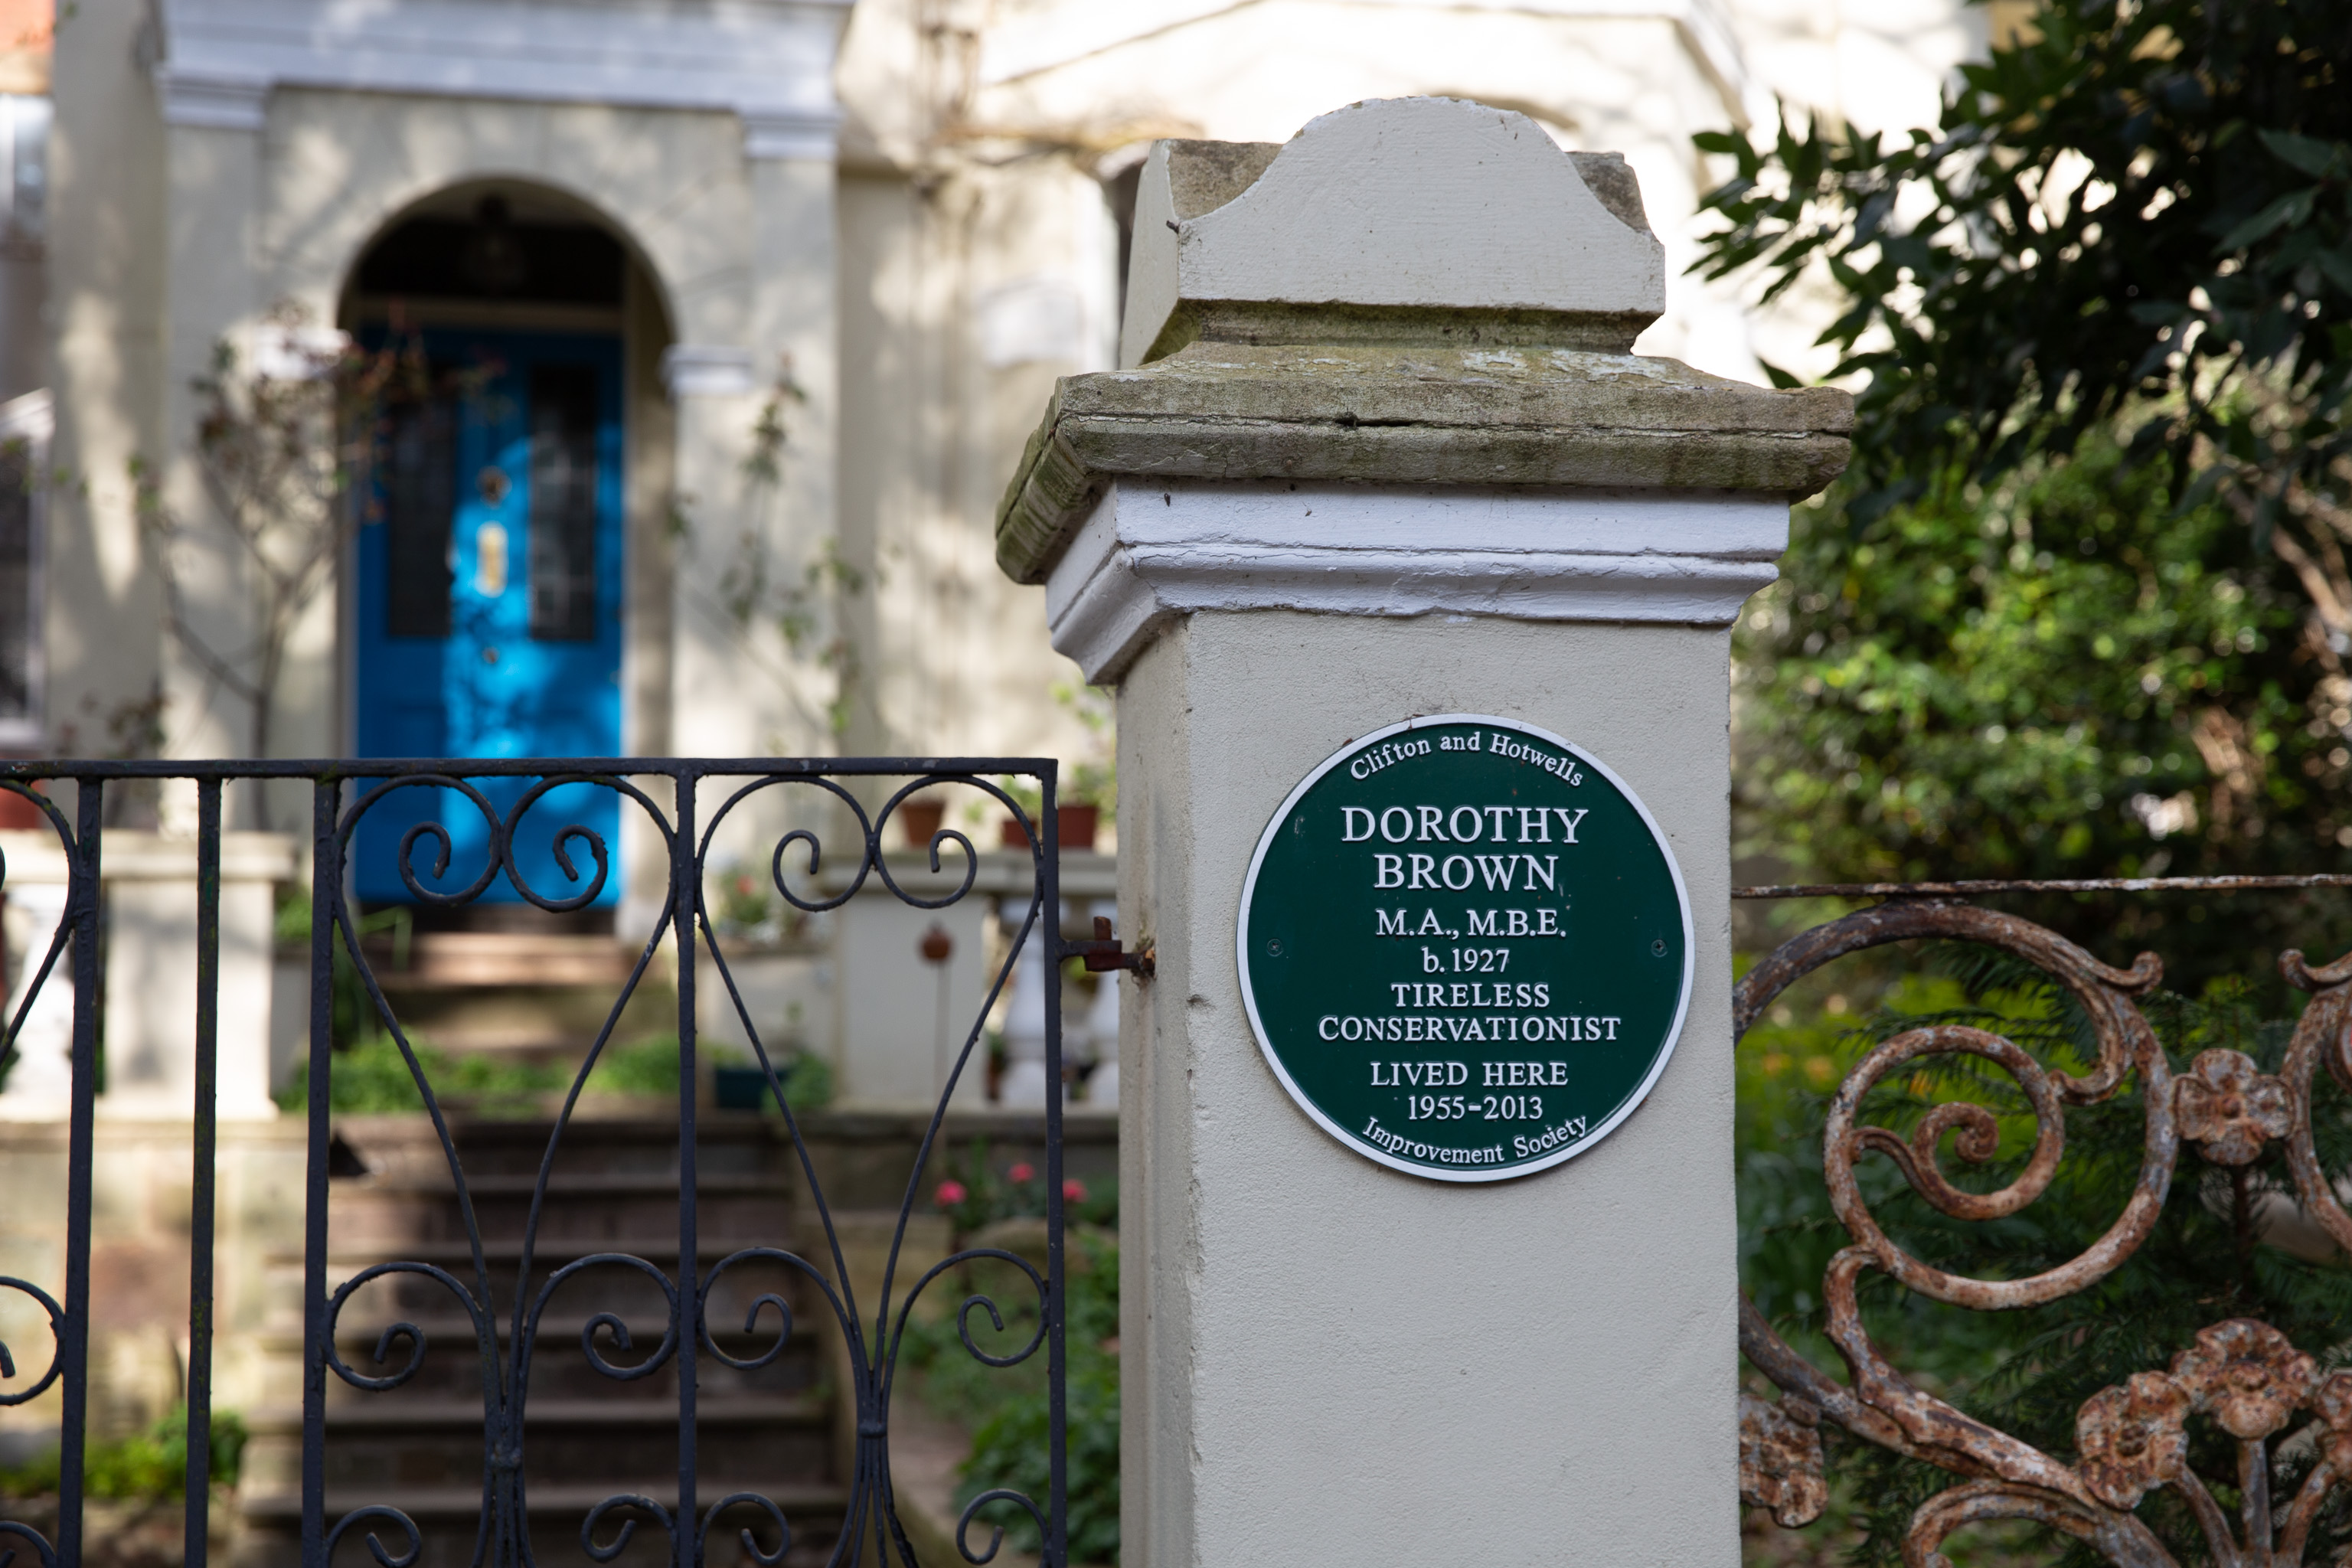 Dorothy Brown
The Guardian's obit calls her "a saviour of historic Bristol".


  At that time, there were 400 buildings in the city earmarked for demolition but...